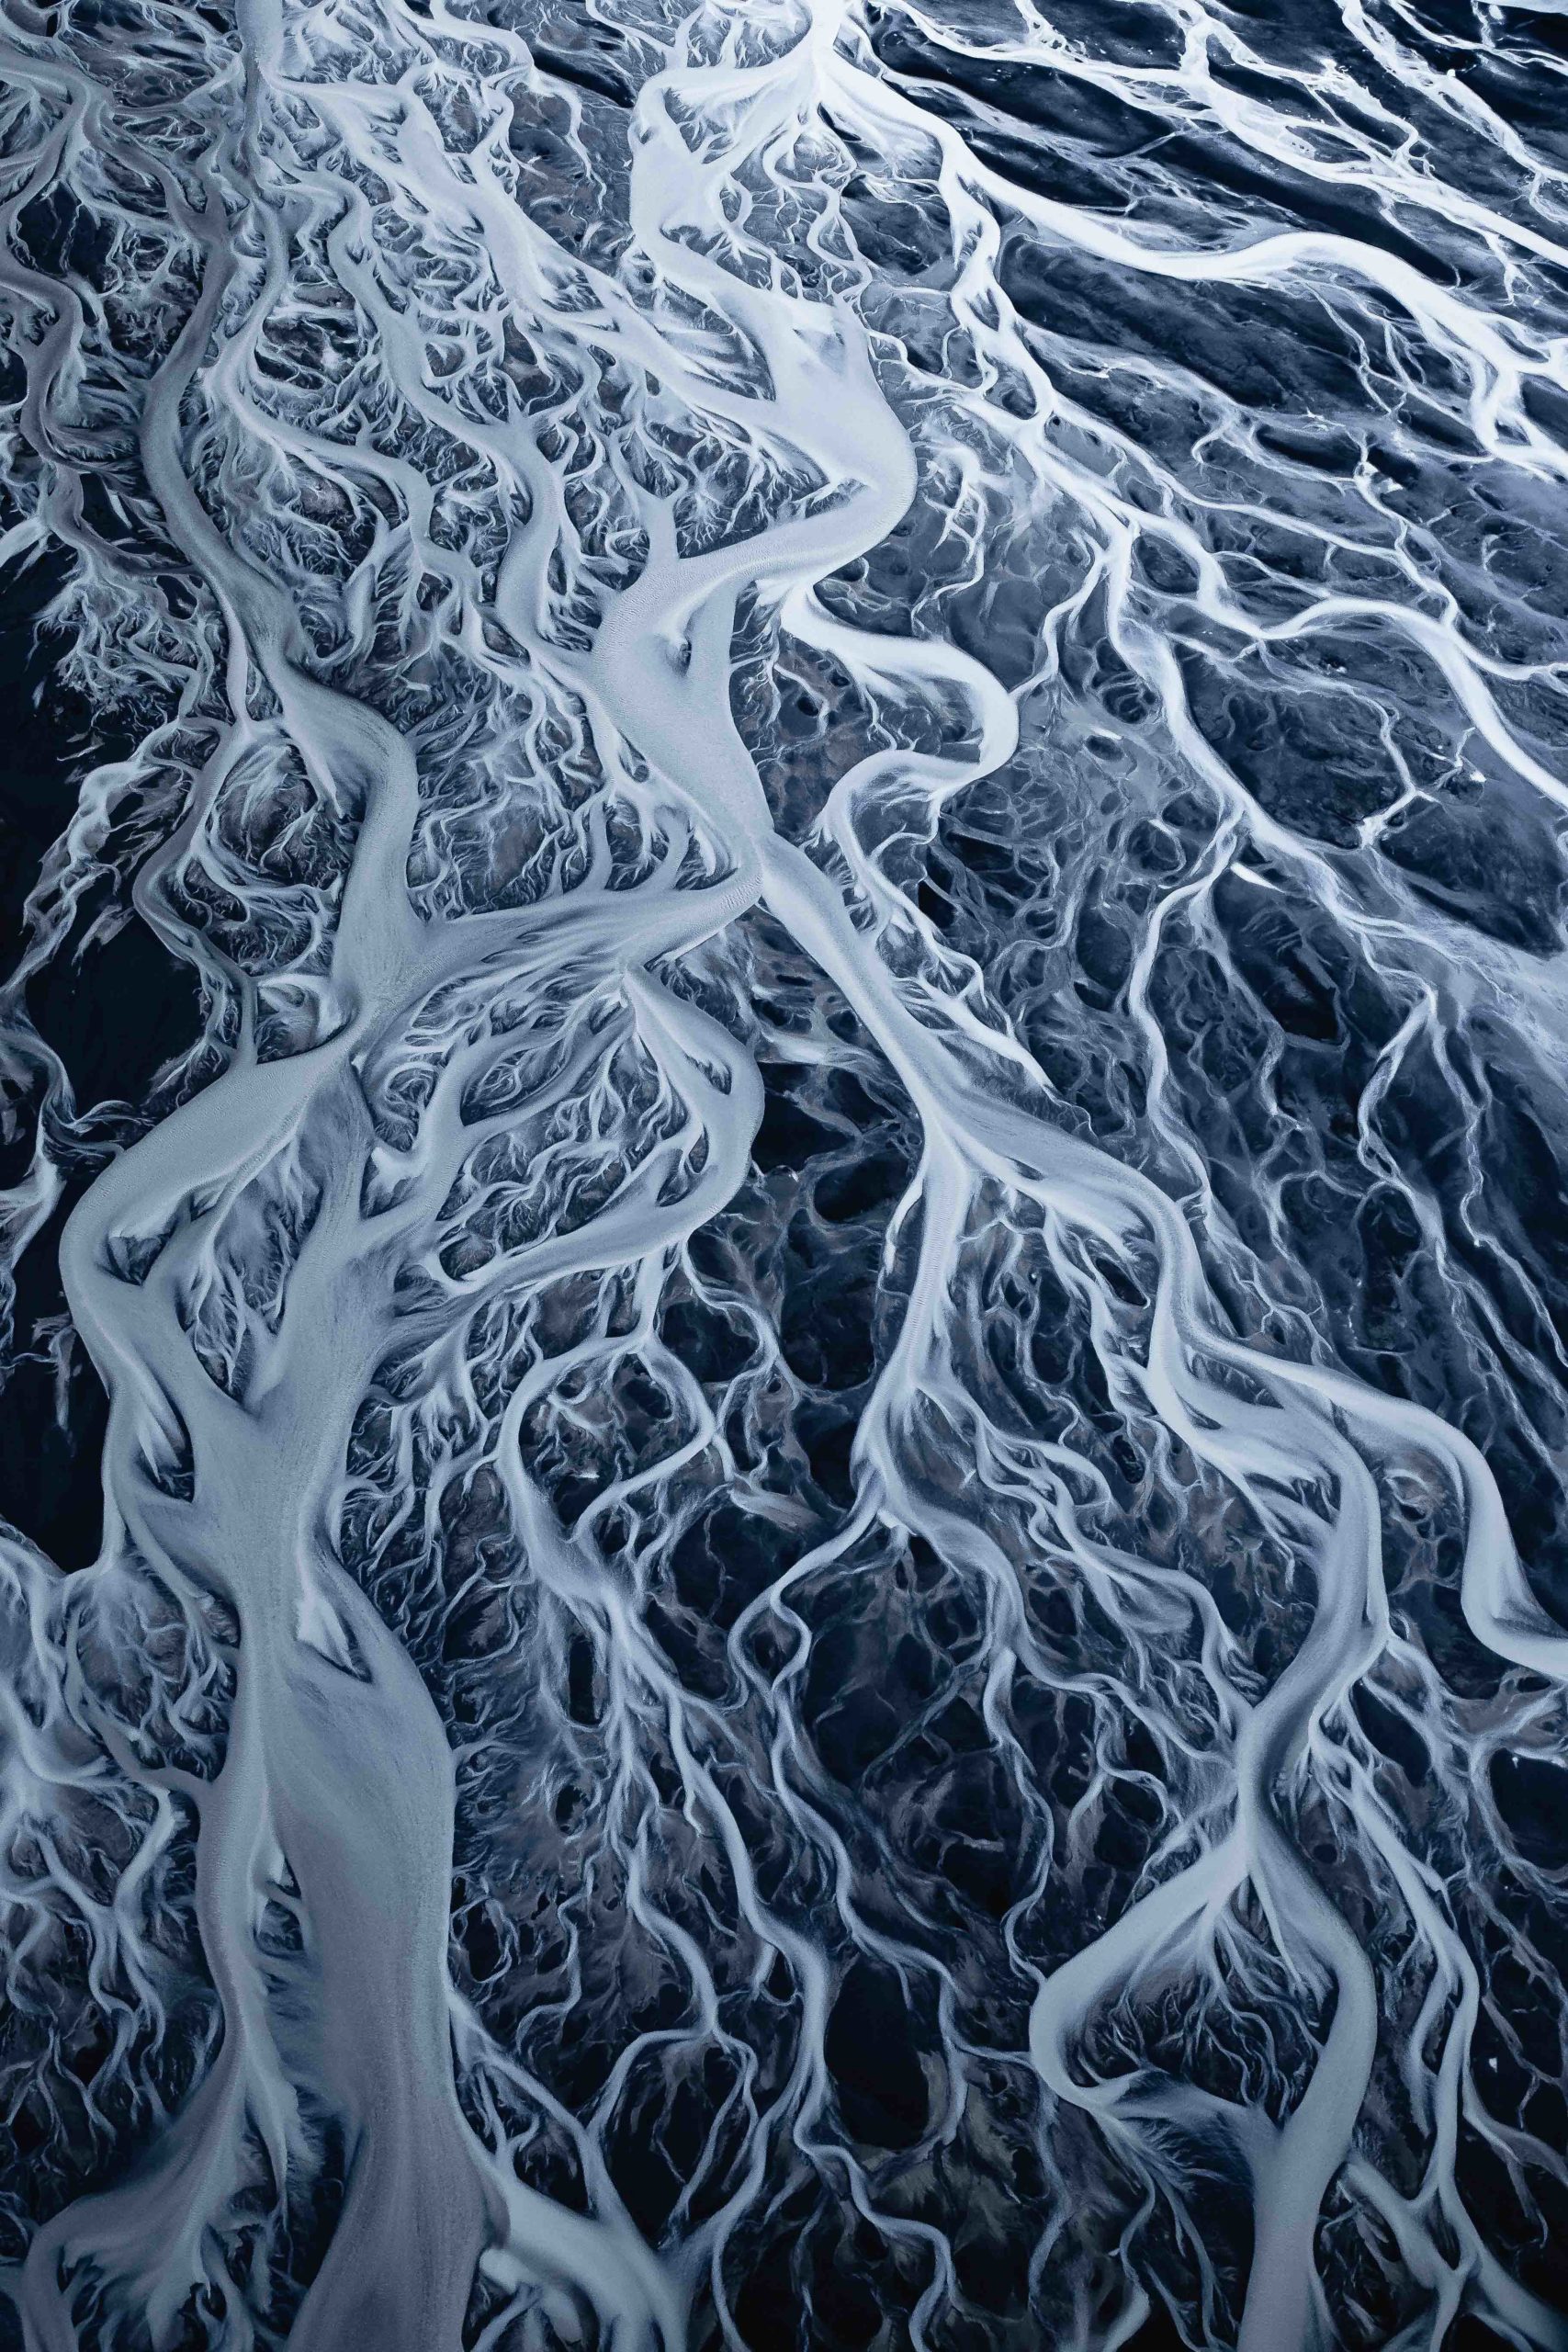 Iceland's Braided Rivers aerial photography